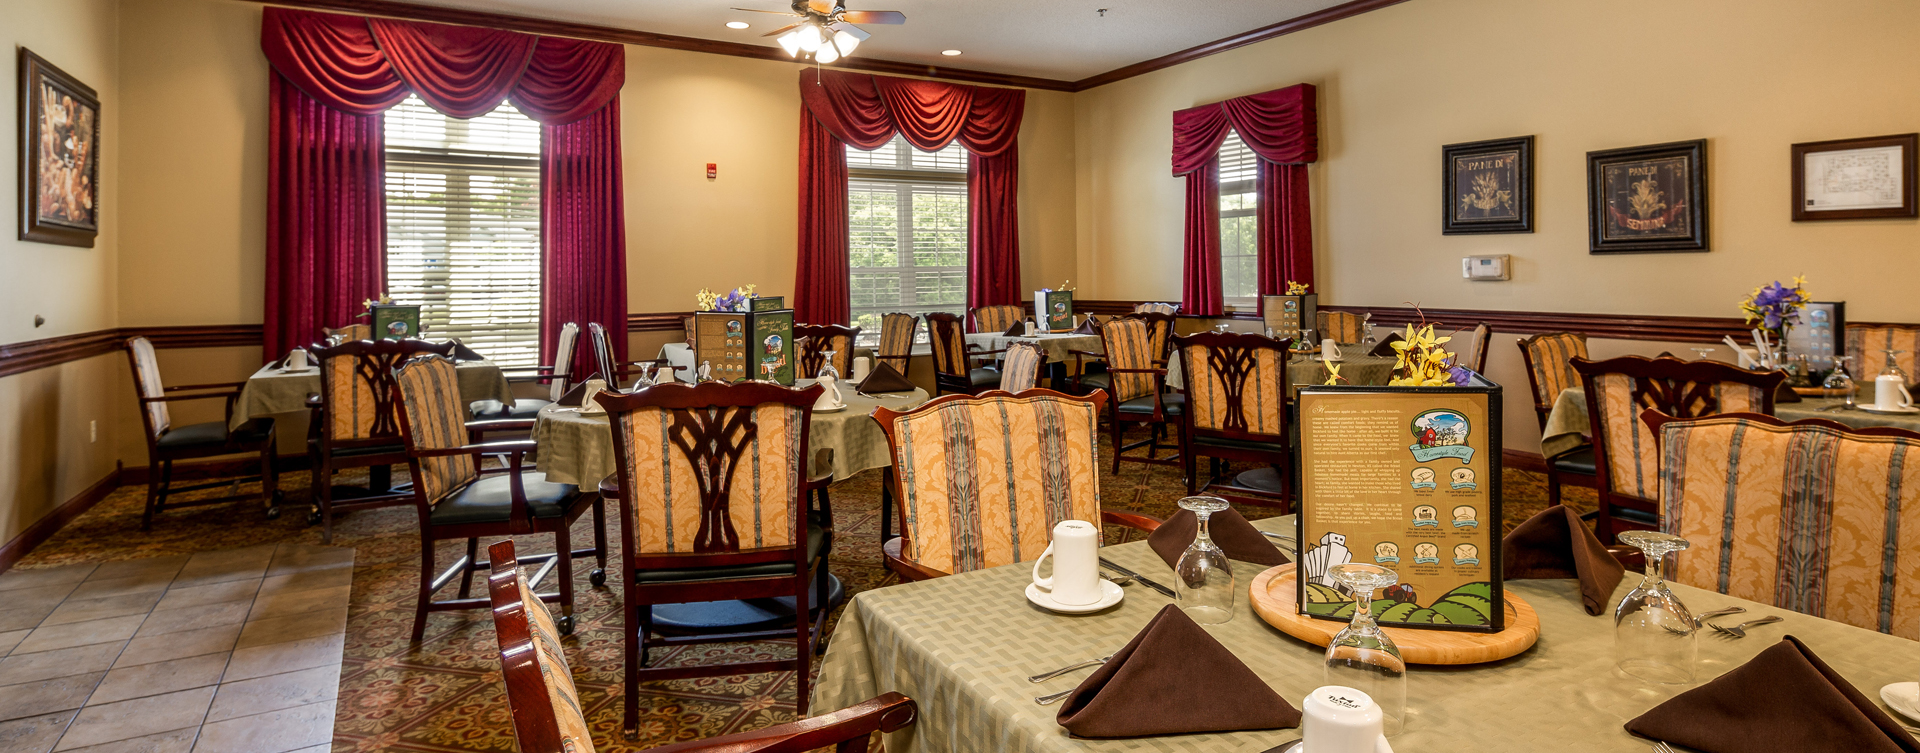 Enjoy homestyle food with made-from-scratch recipes in our dining room at Bickford of Battle Creek